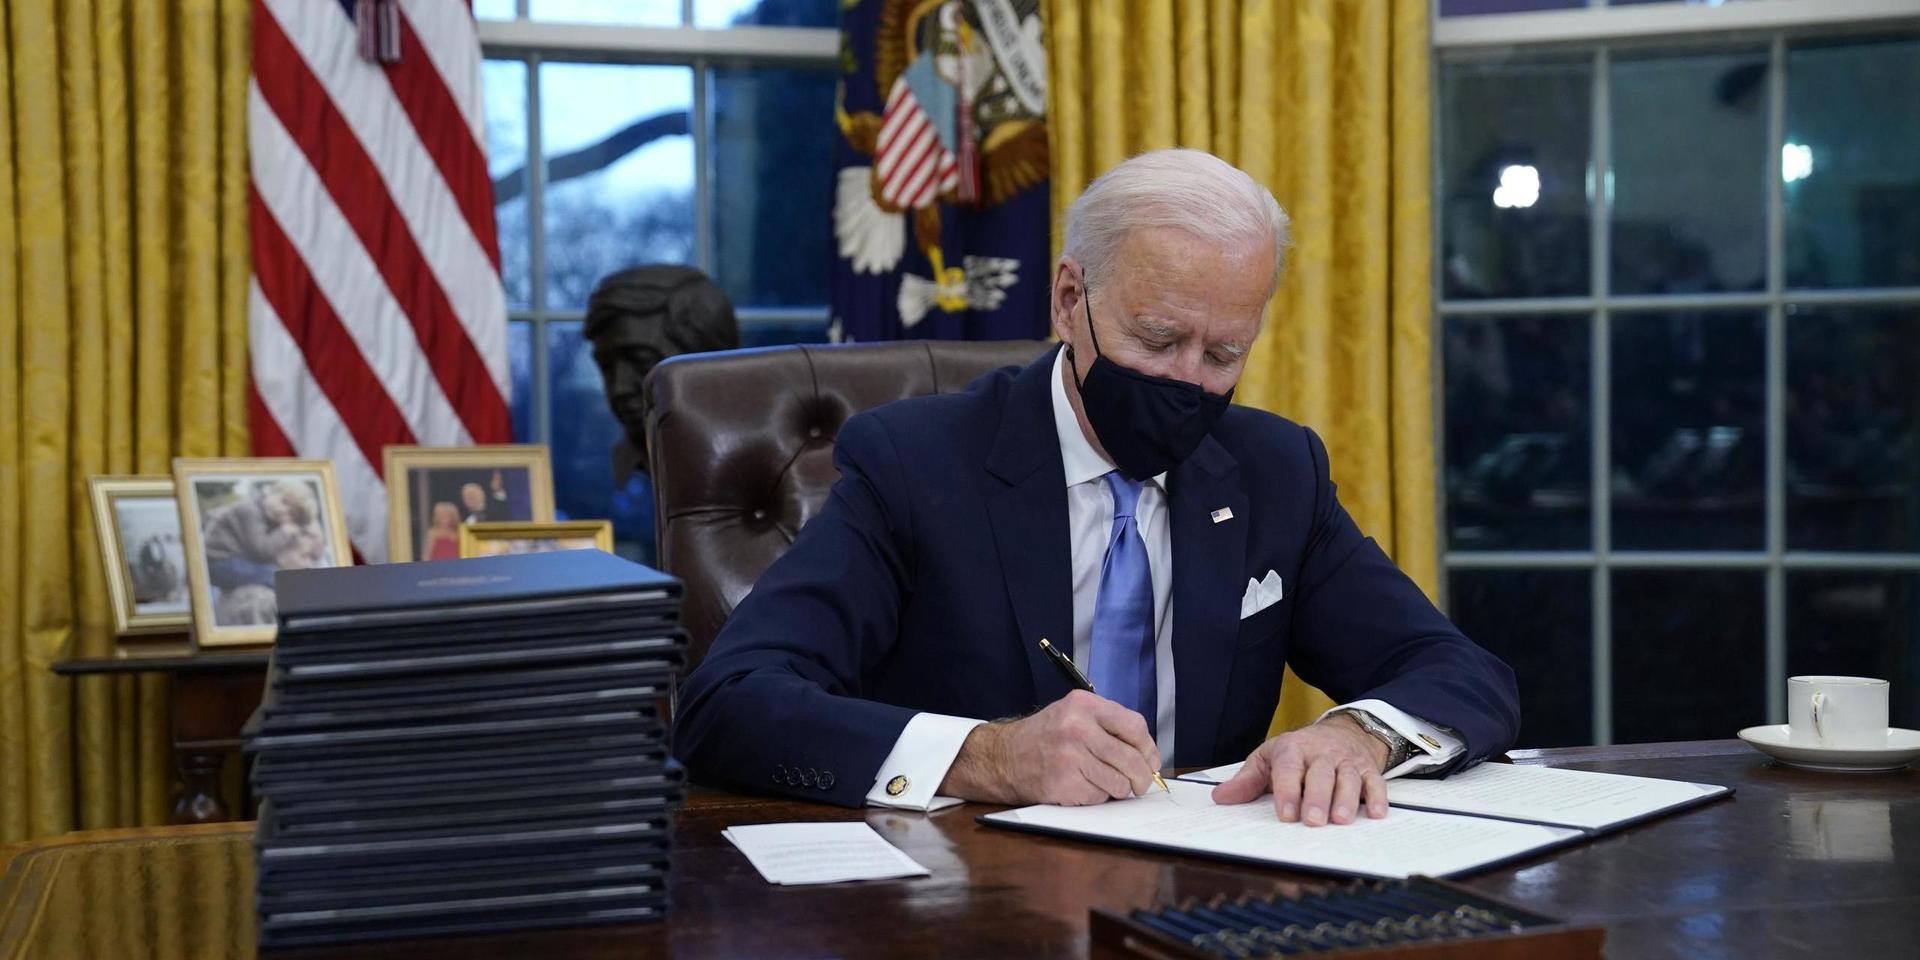 President Joe Biden signs his first executive order in the Oval Office of the White House on Wednesday, Jan. 20, 2021, in Washington. (AP Photo/Evan Vucci)  DCEV554